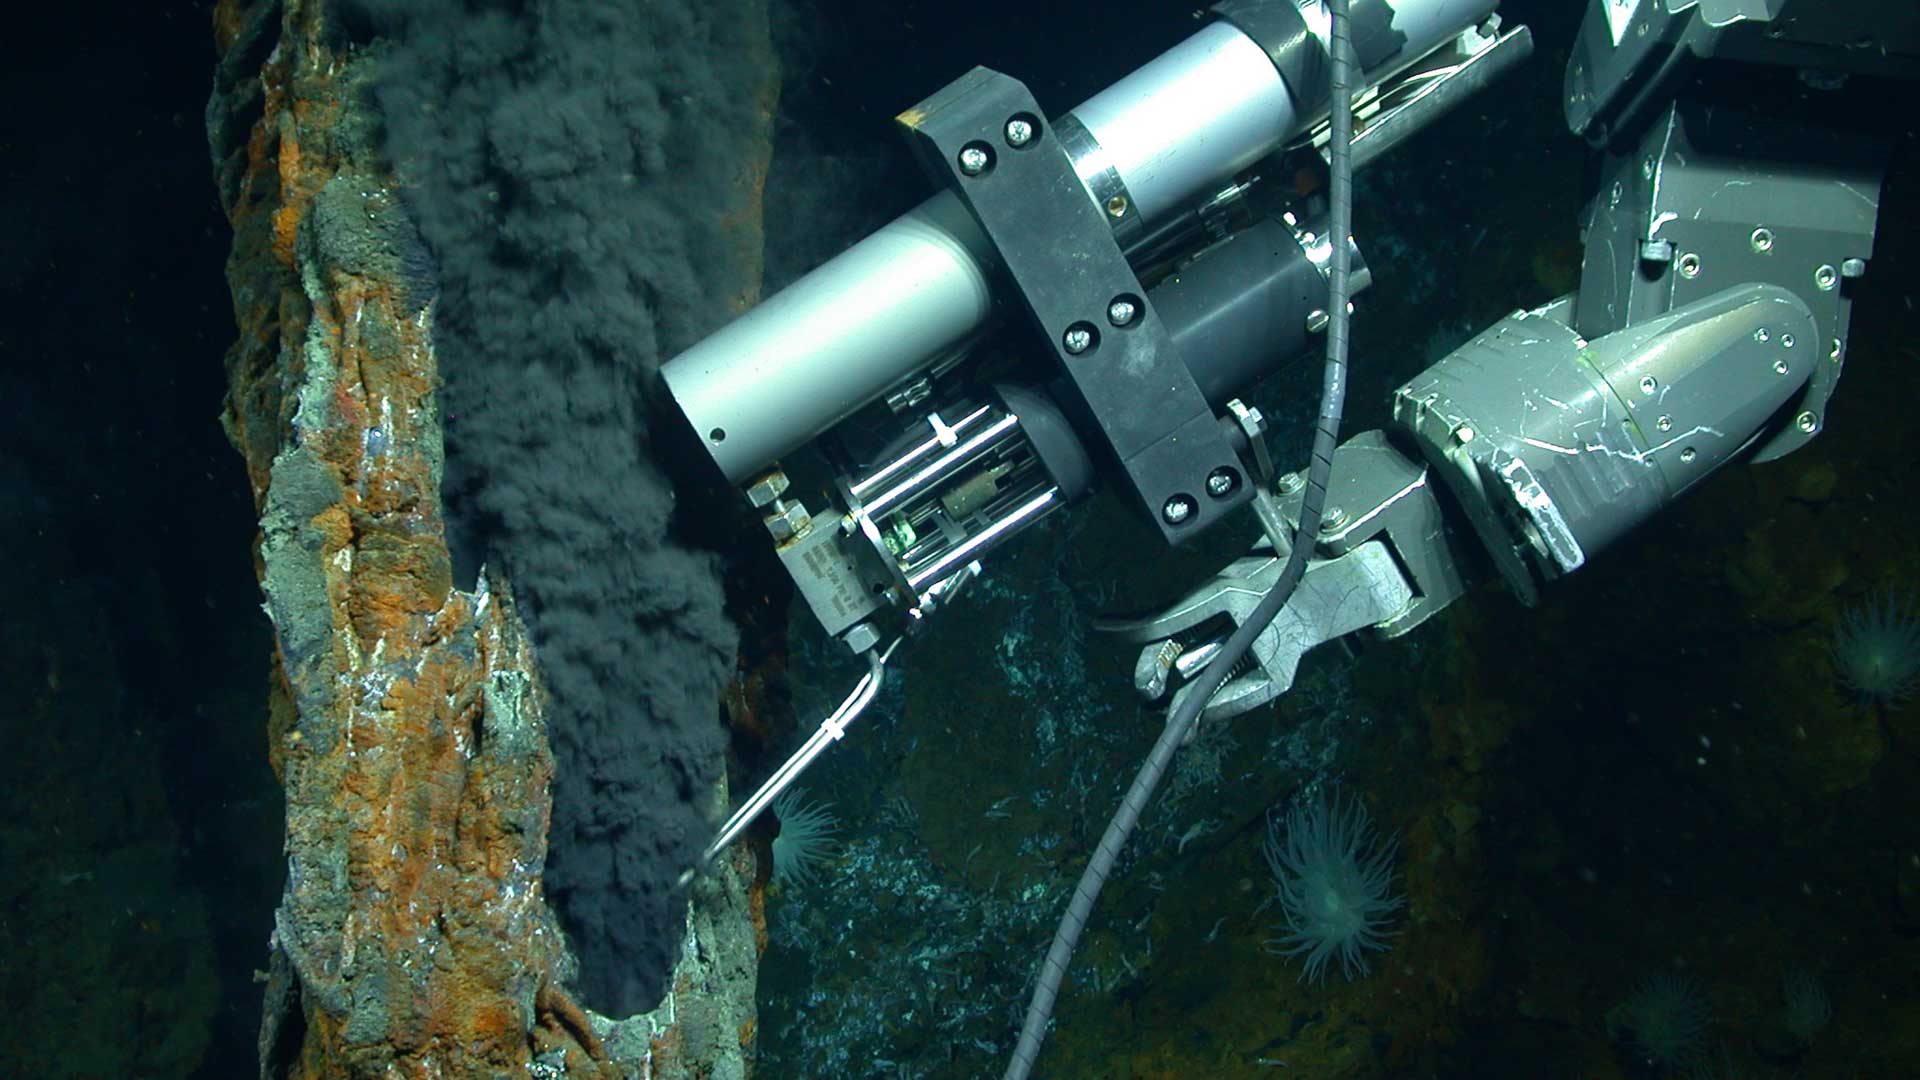 The slender snorkel of an Isobaric Gas-Tight sampler (IGT) draws a sample of hydrothermal fluids spewing out of a hydrothermal vent